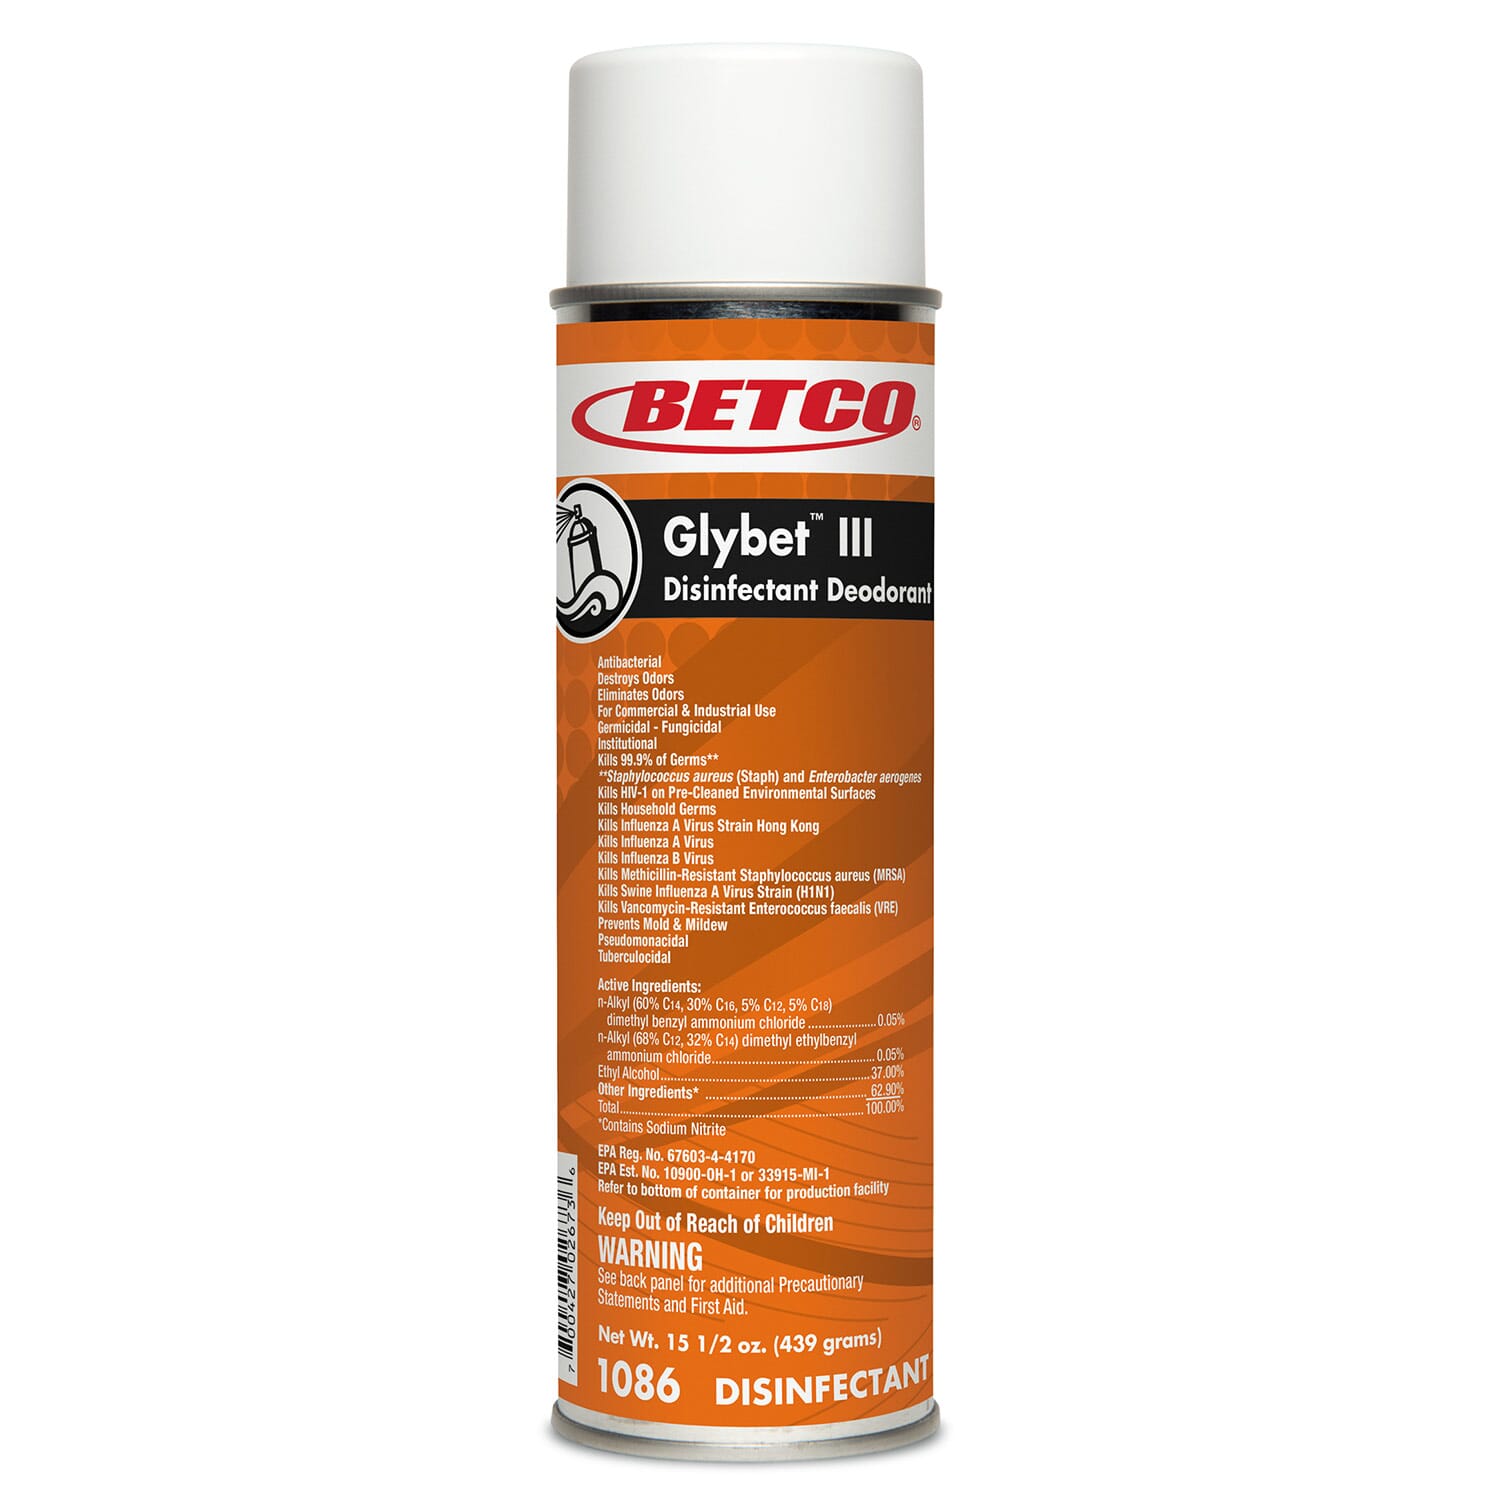 Betco Glybet Aerosol Disinfectant - Registered by the EPA for use against SARS-CoV-2 (COVID-19)